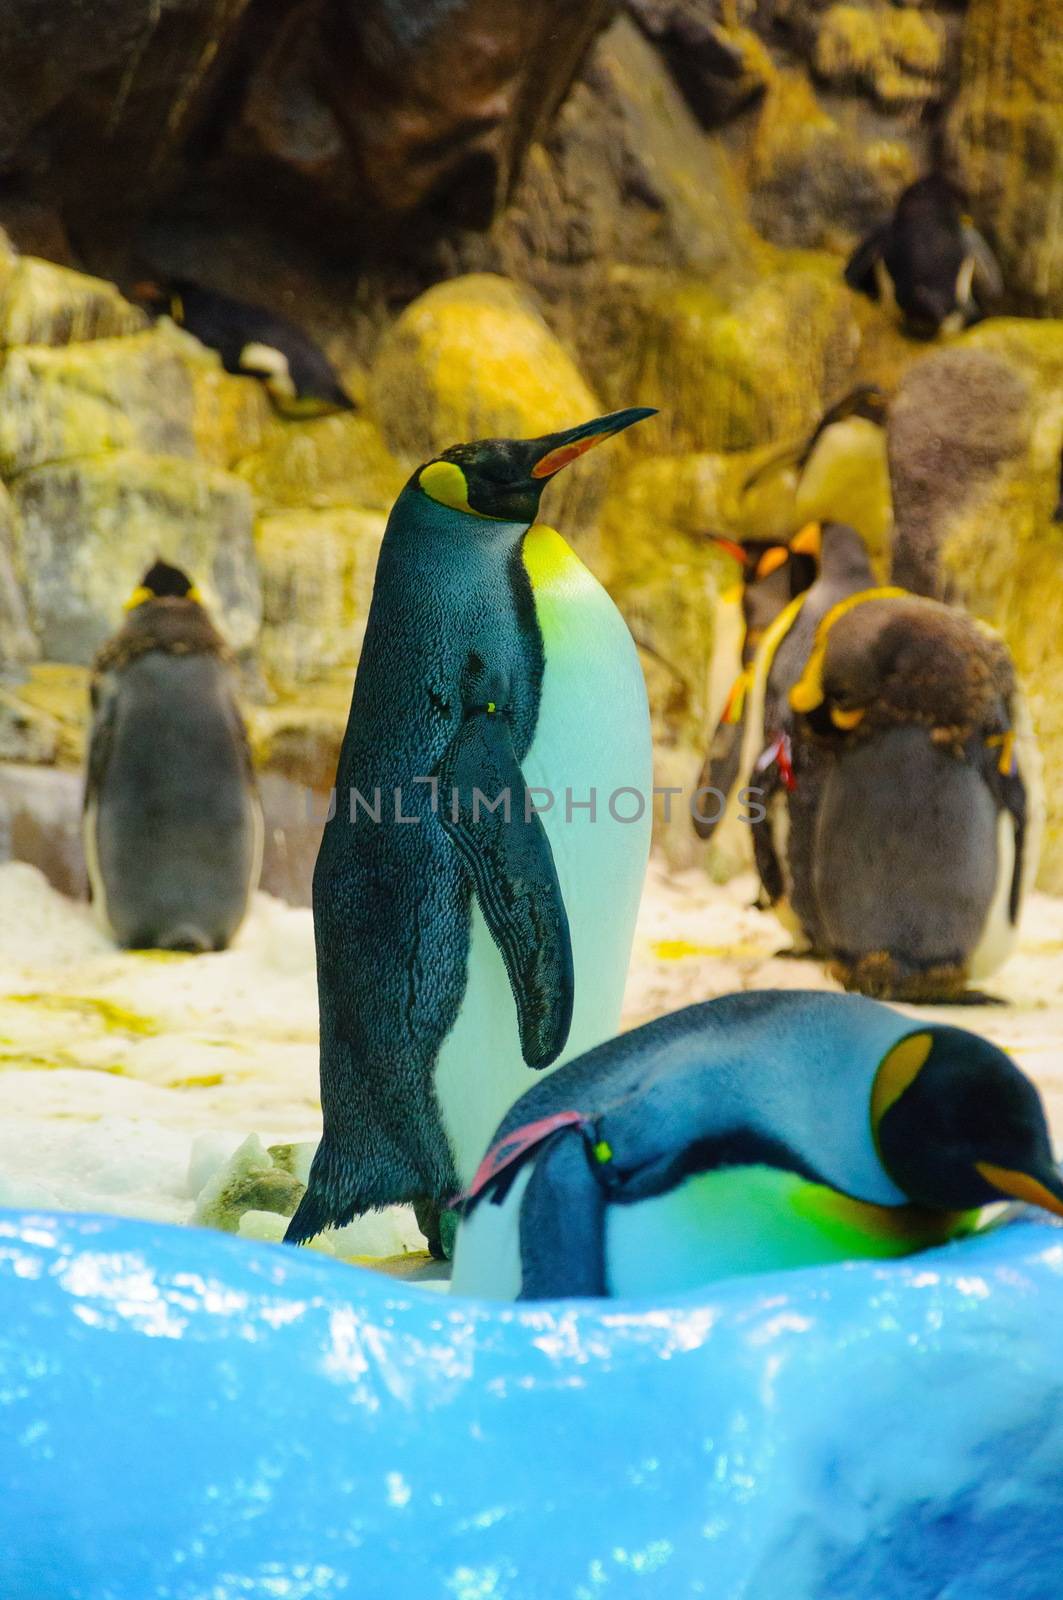 Big King penguins in Loro Parque, Tenerife, Canary Islands